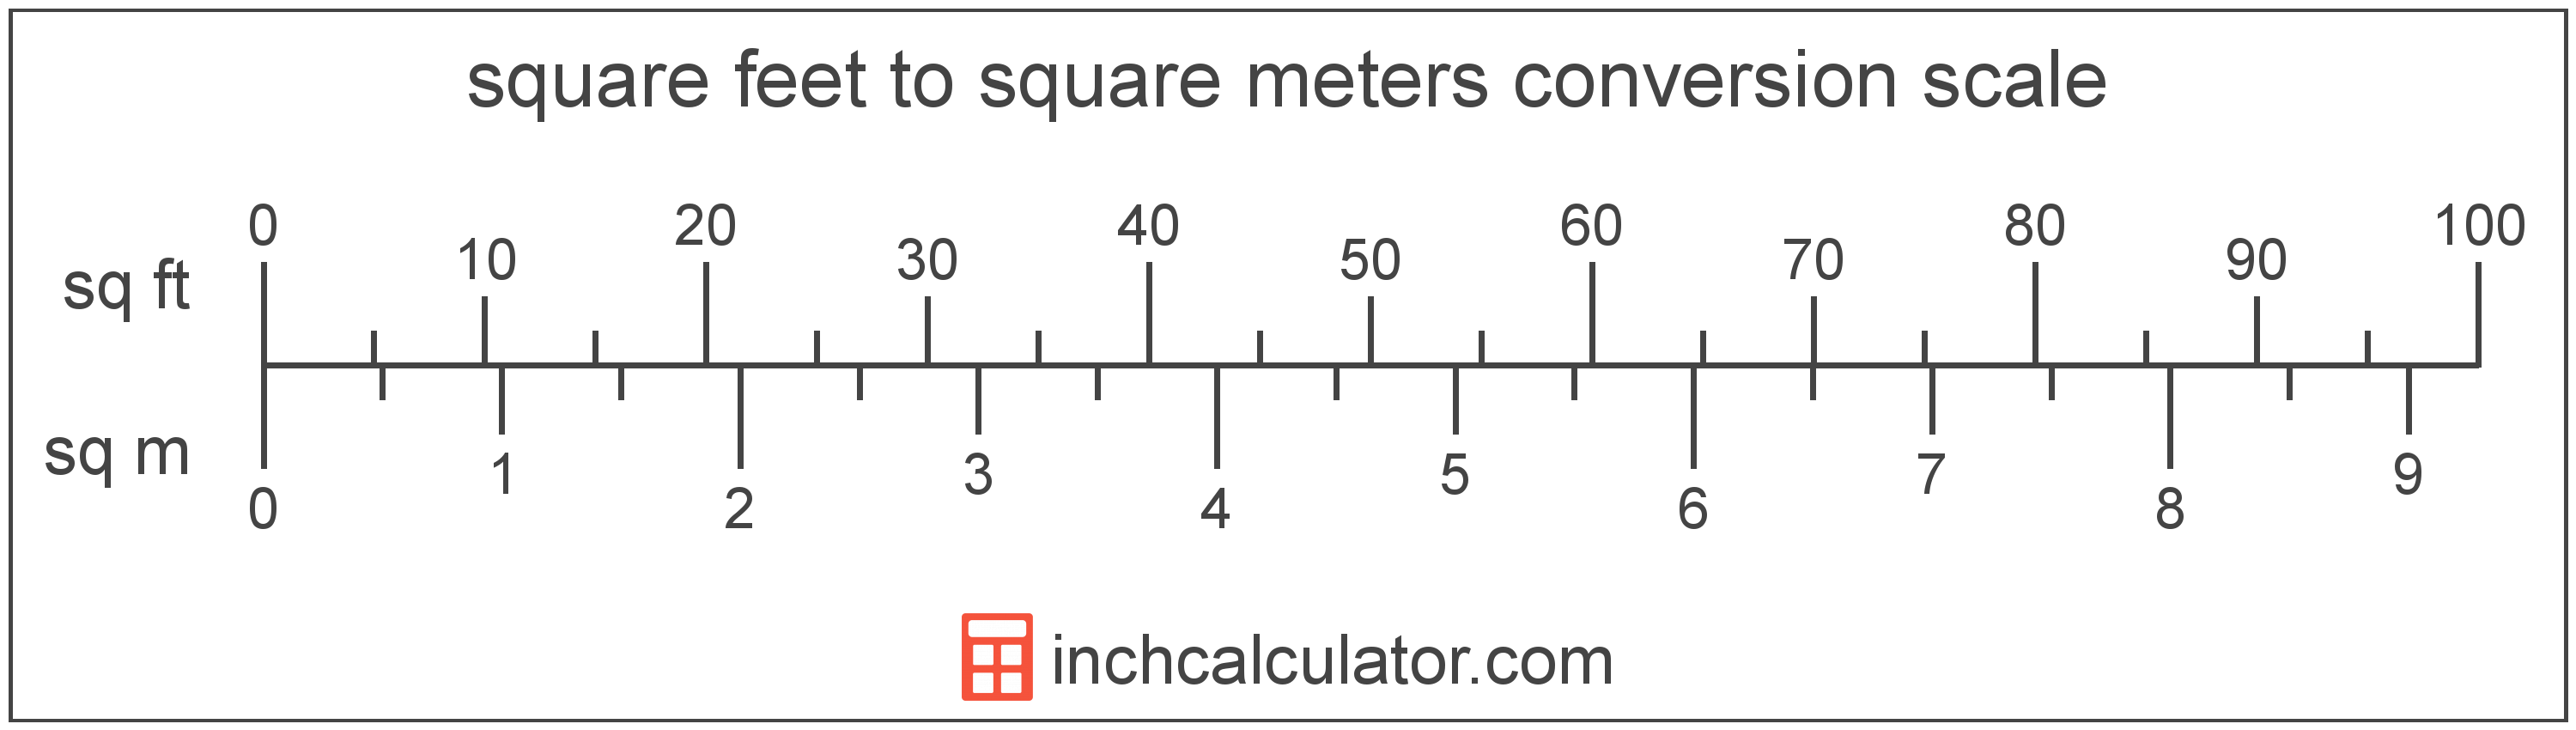 conversion scale showing square feet and equivalent square meters area values